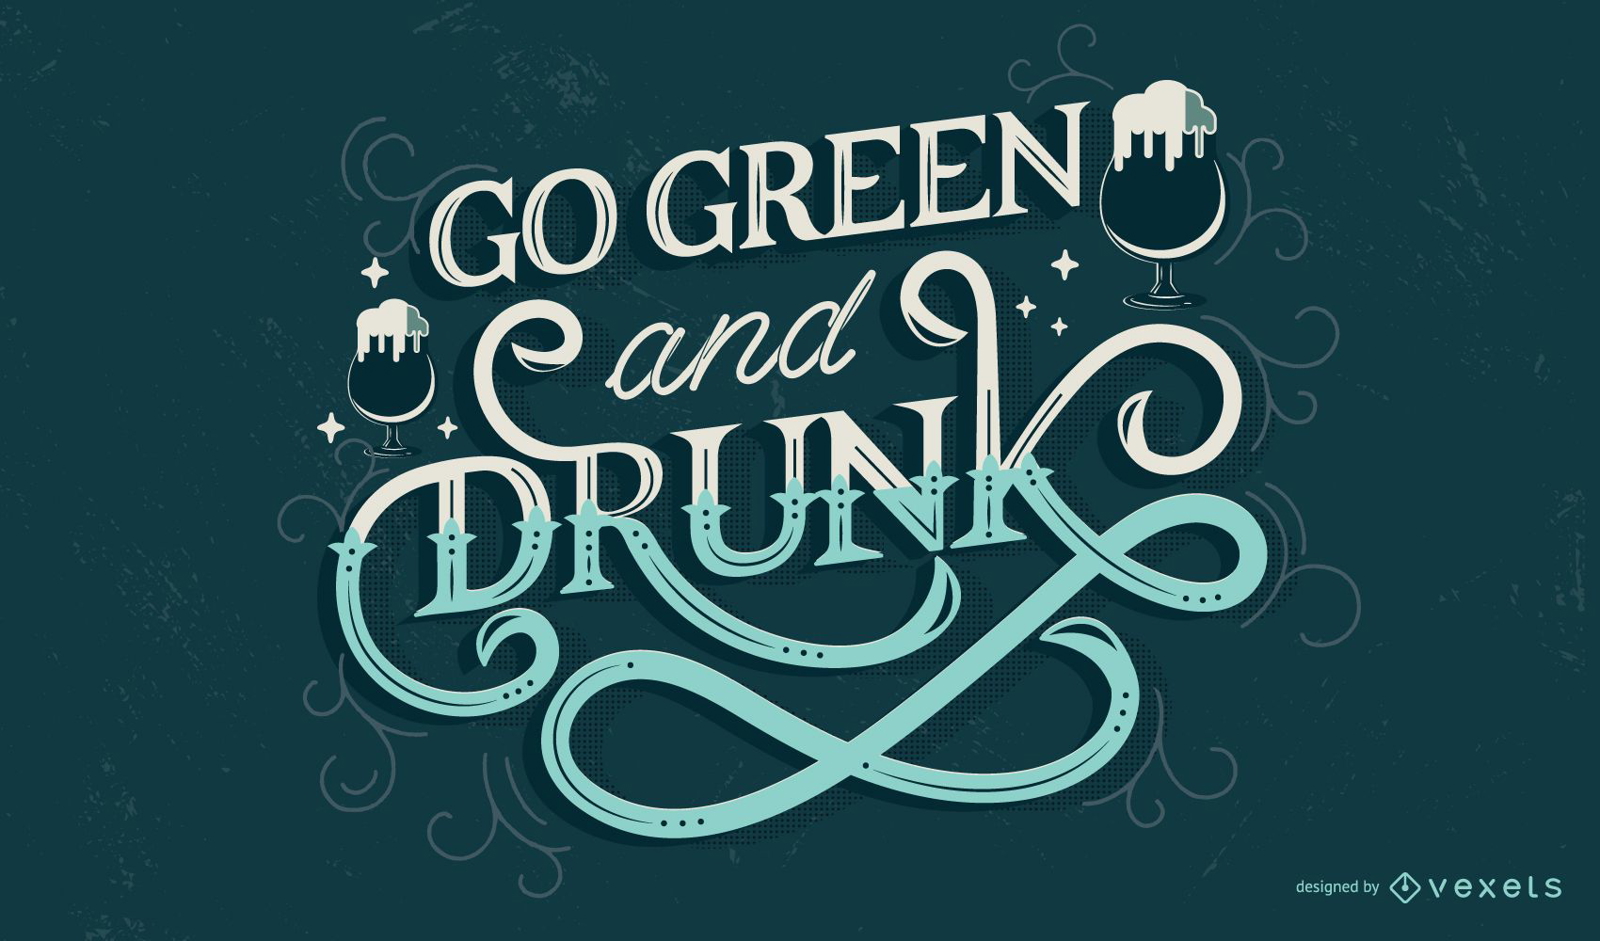 Green and drunk St patricks lettering